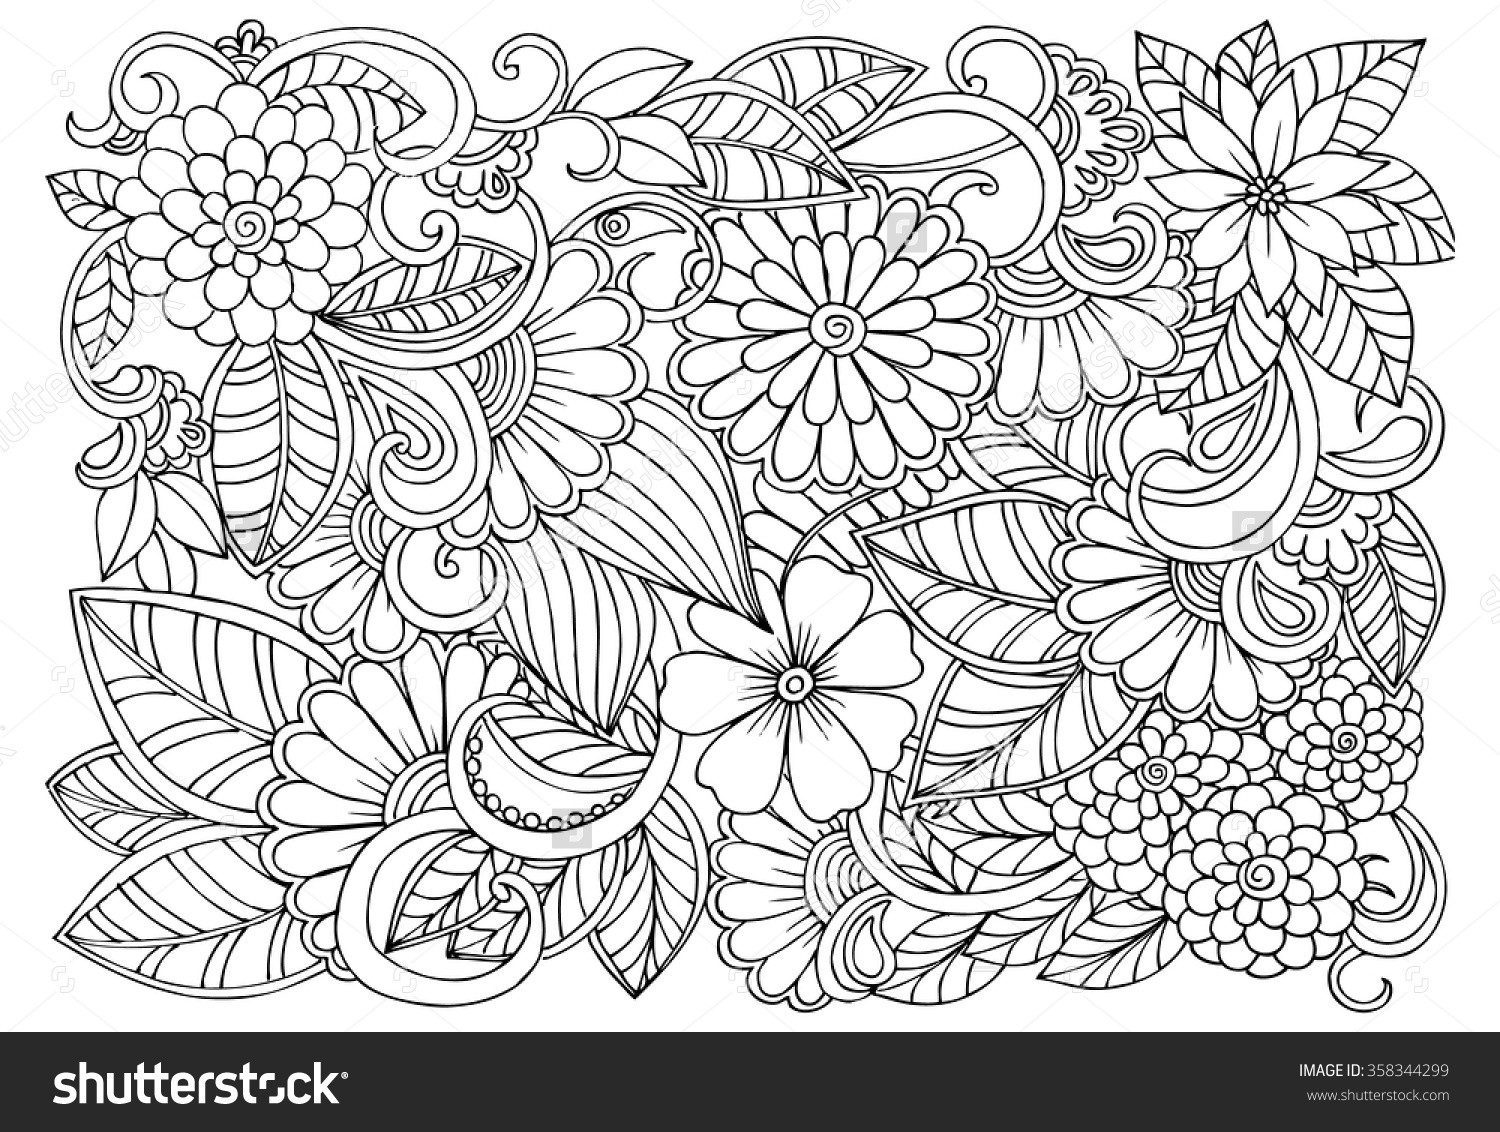 Adult Coloring Pages Patterns Flowers
 Patterns Drawing at GetDrawings